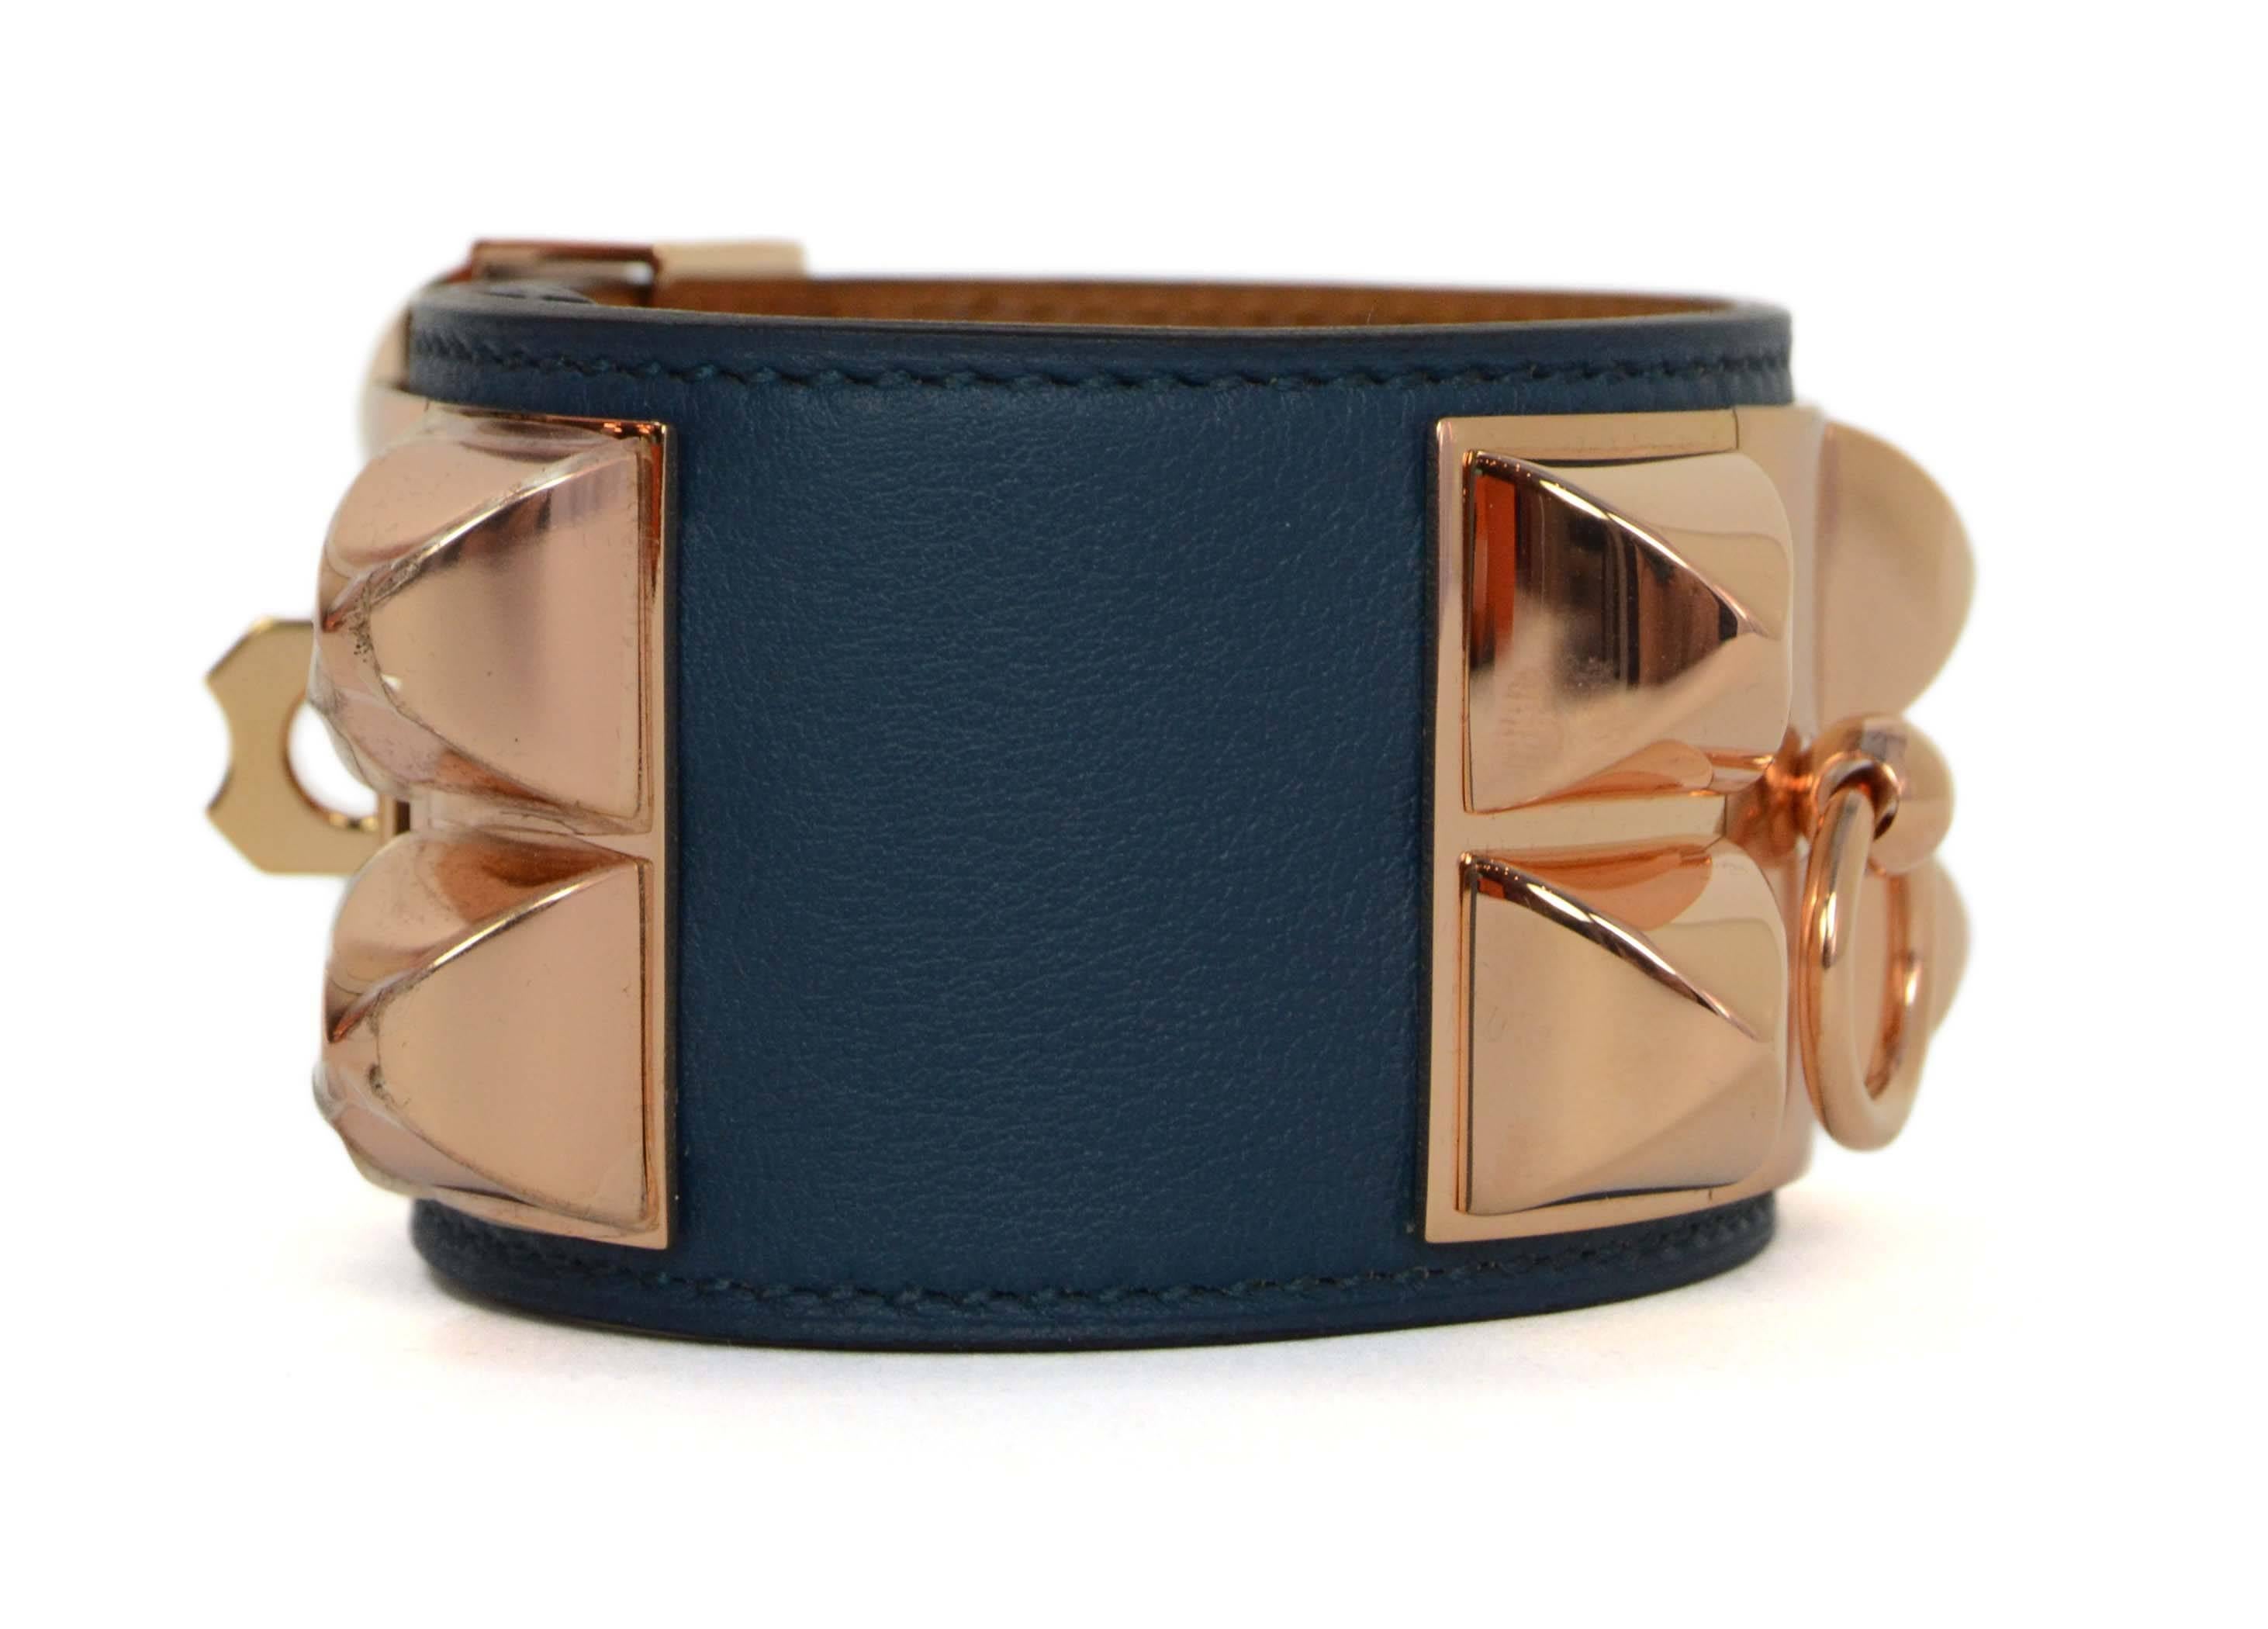 Hermes Mallard Blue Leather CDC Cuff 
Features rose gold hardware
Made In: France
Year of Production: 2015
Color: Blue mallard and rose gold
Hardware: Rose goldtone
Materials: Leather and metal
Closure: Stud and notch closure with sliding